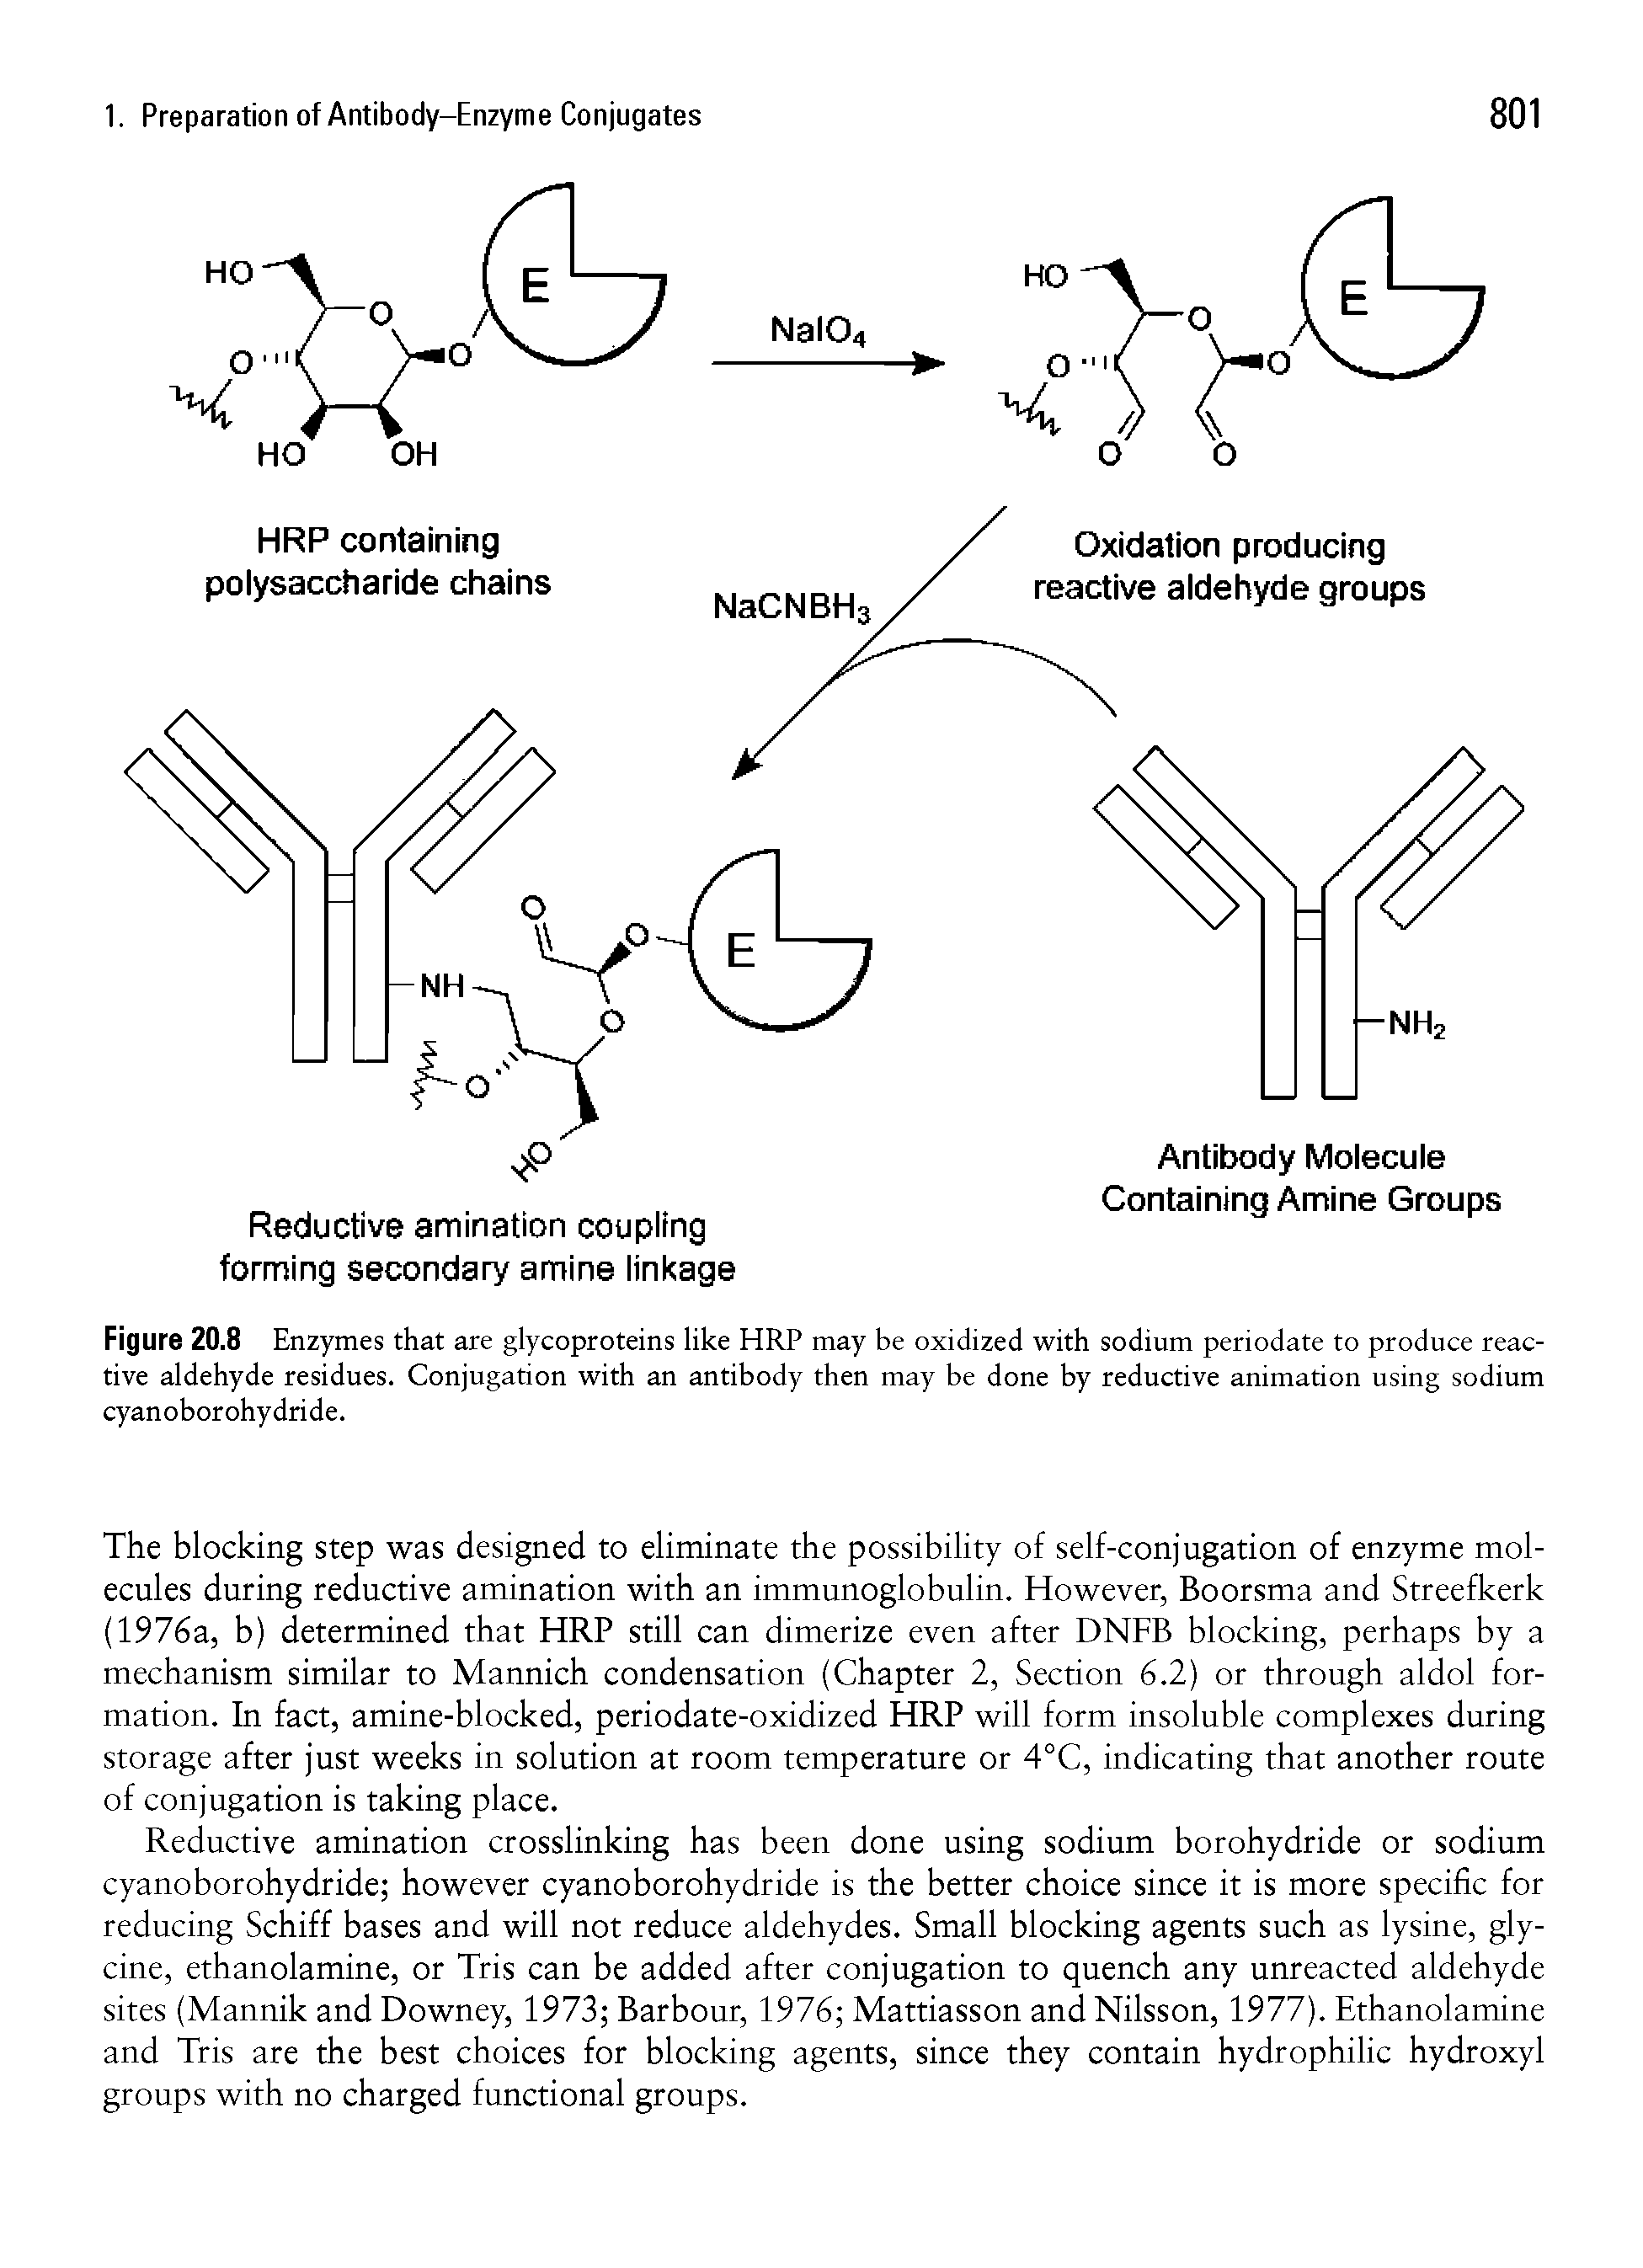 Figure 20.8 Enzymes that are glycoproteins like HRP may be oxidized with sodium periodate to produce reactive aldehyde residues. Conjugation with an antibody then may be done by reductive animation using sodium cyanoborohydride.